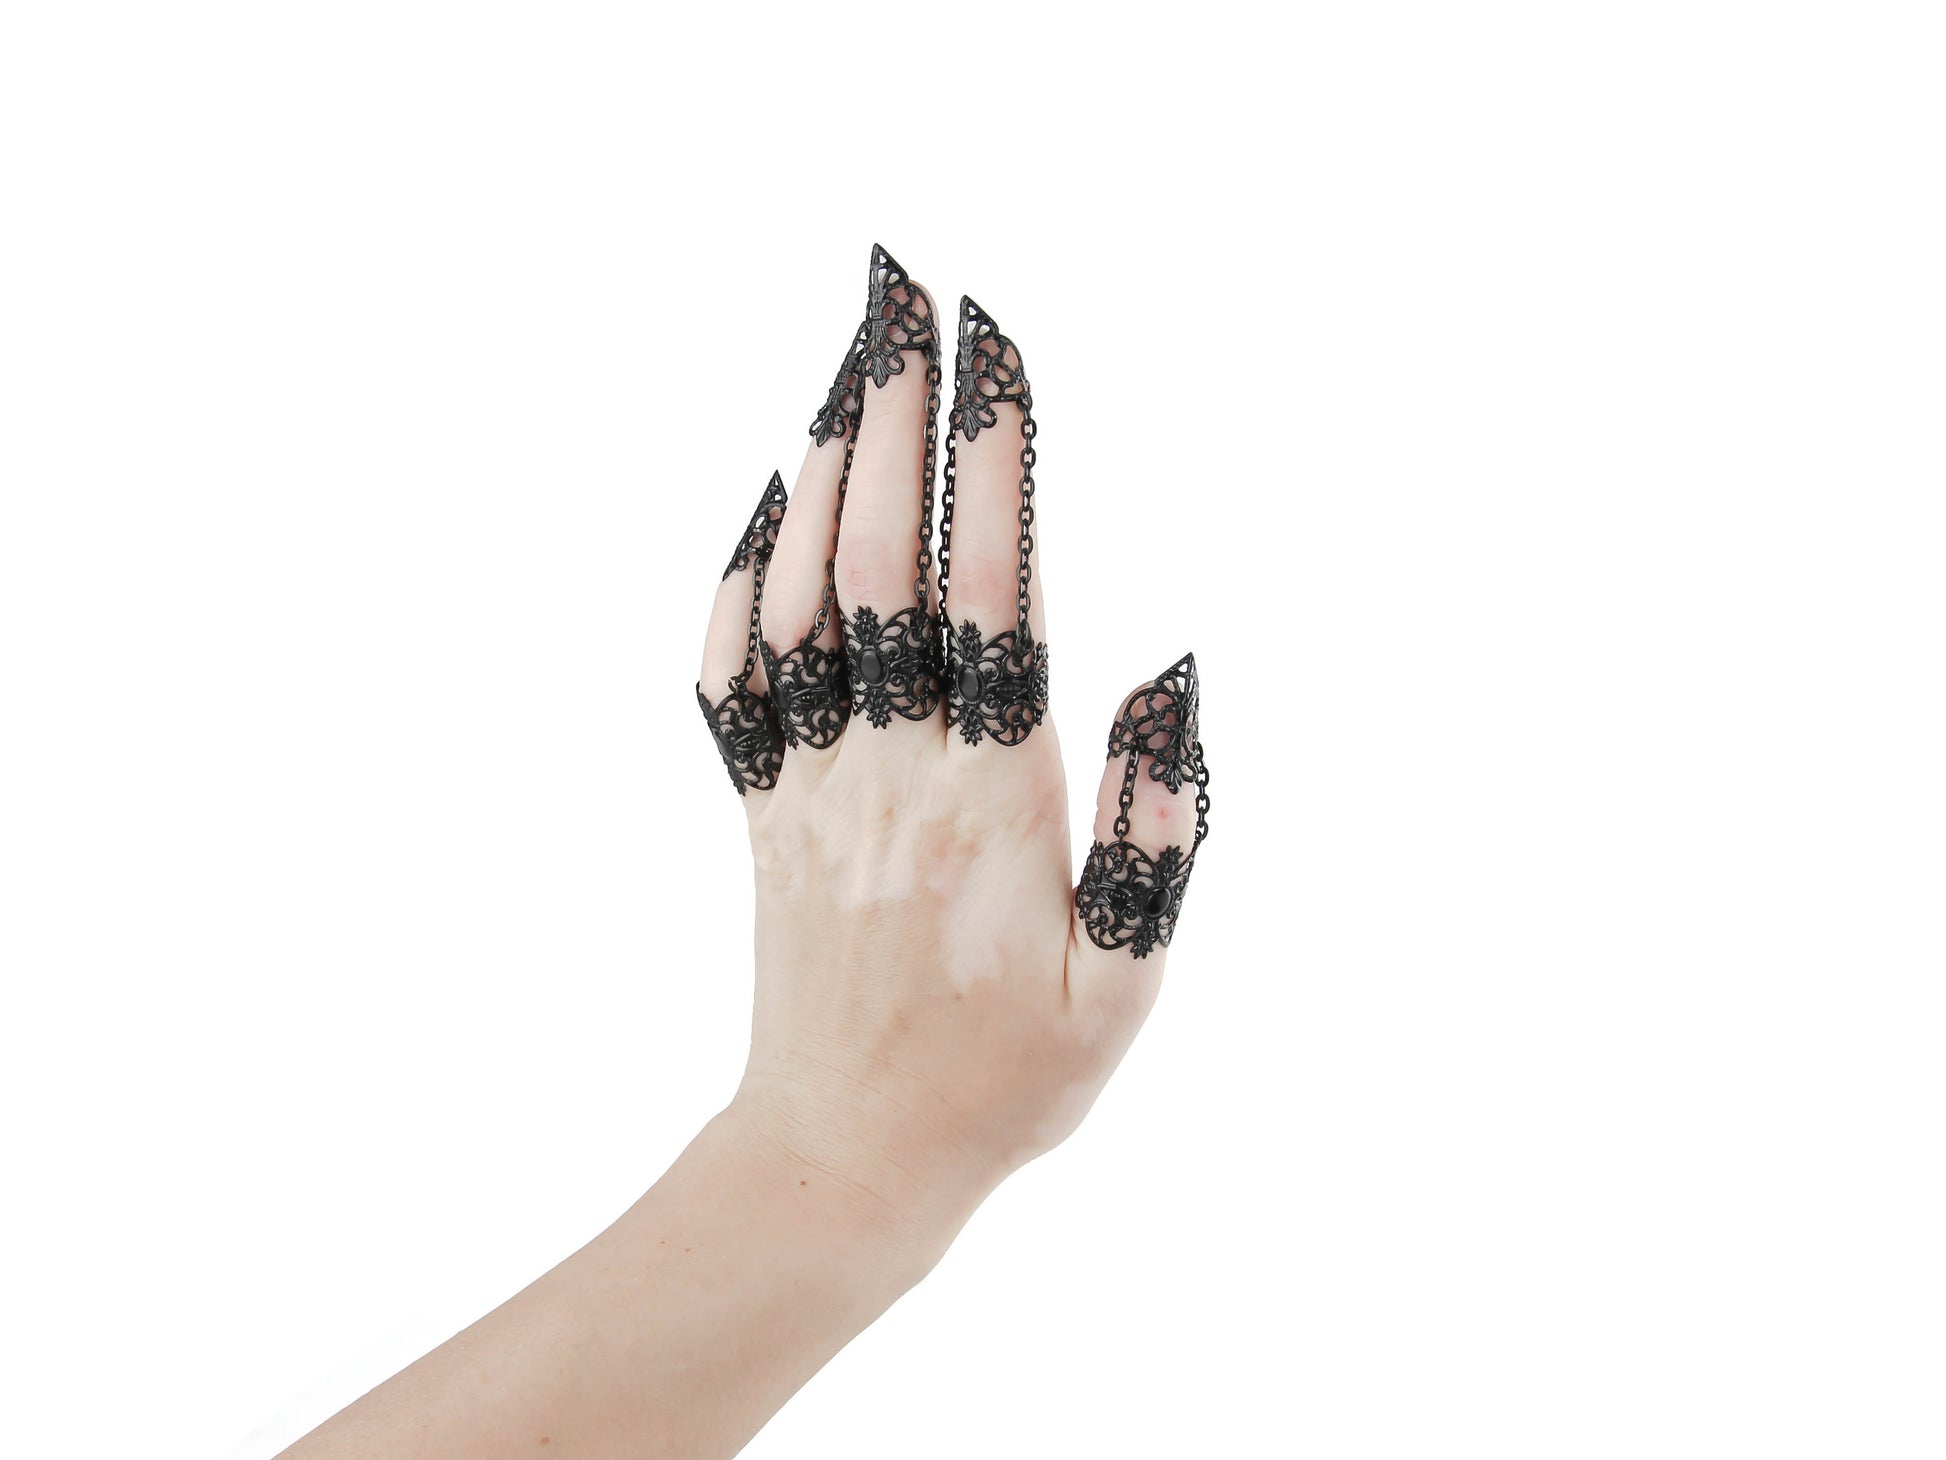 A hand models a full set of ornate black claw rings, designed by Myril Jewels with a neo-gothic flair. These striking pieces merge dark avant-garde artistry with Halloween and punk jewelry influences, perfect for whimsigoth and witchcore styles or as a distinctive accessory for rave parties and festivals. They're also a bold choice for everyday wear, offering an edgy touch to any outfit, and make thoughtful gifts for those with a goth girlfriend or friends who love statement jewelry.